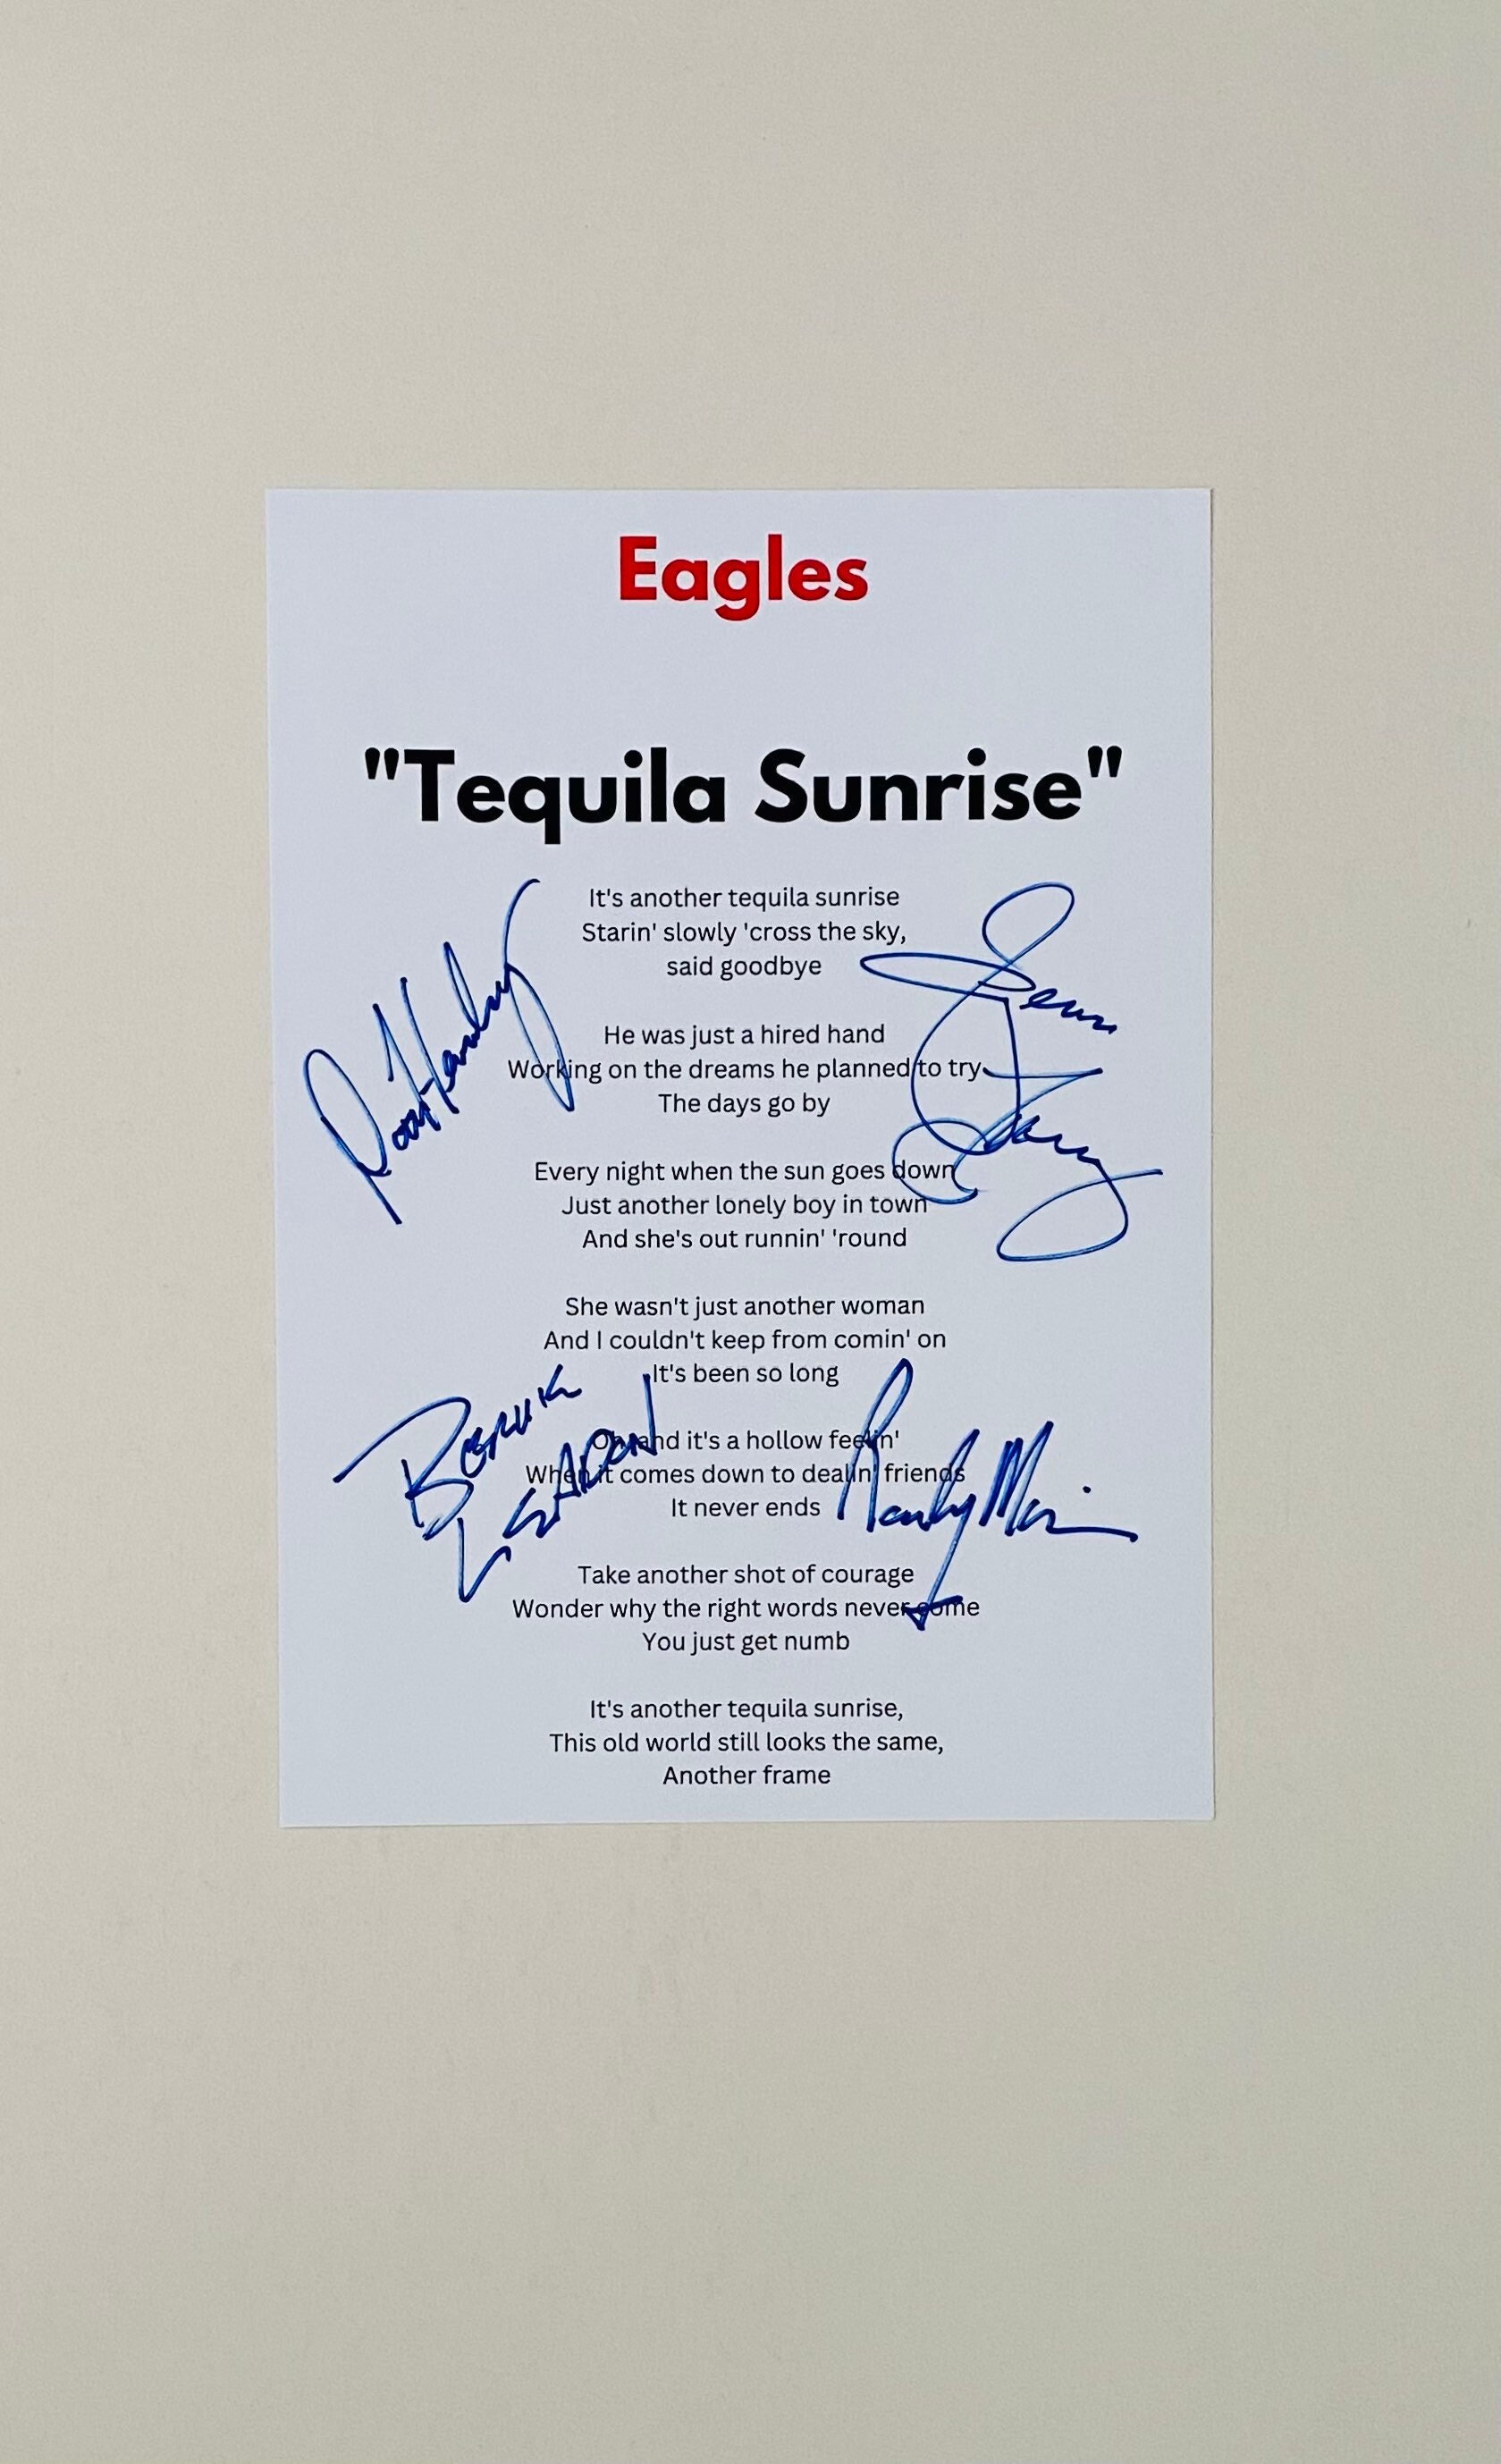 An Evening of EAGLES Music with ANOTHER TEQUILA SUNRISE